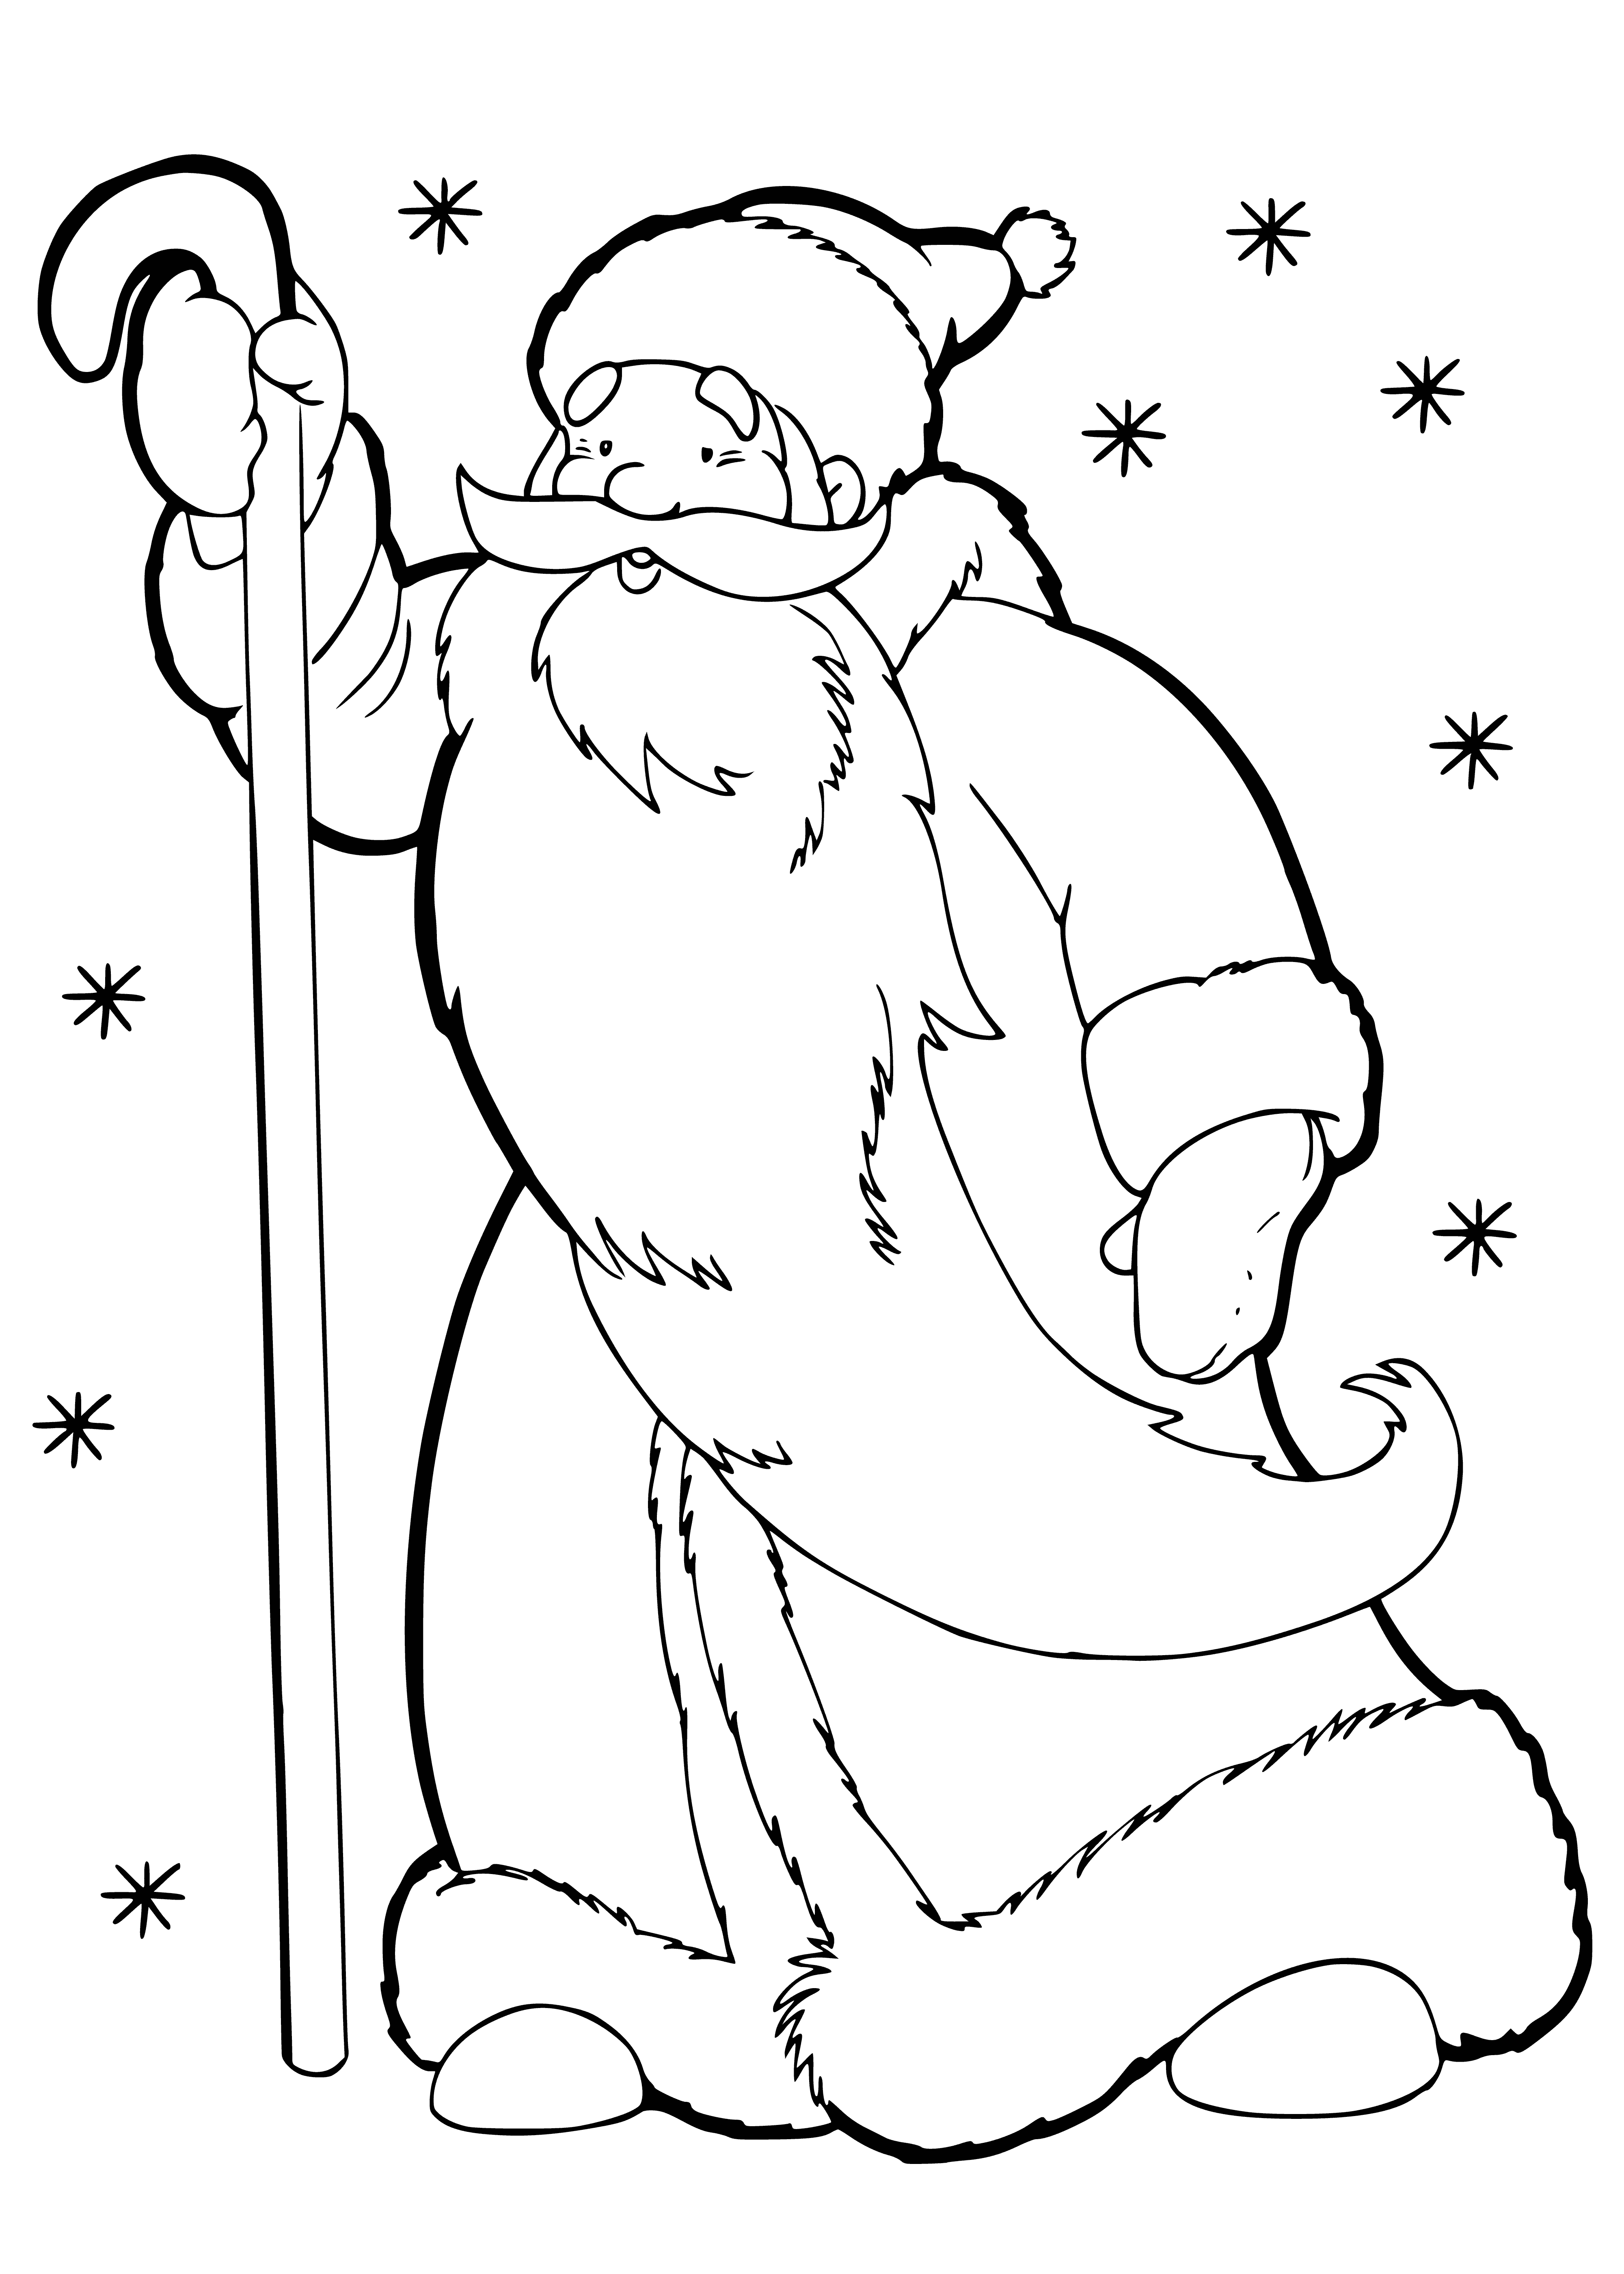 coloring page: Man in red suit with long white beard stands with staff in hand & sack over shoulder, in front of group of children.